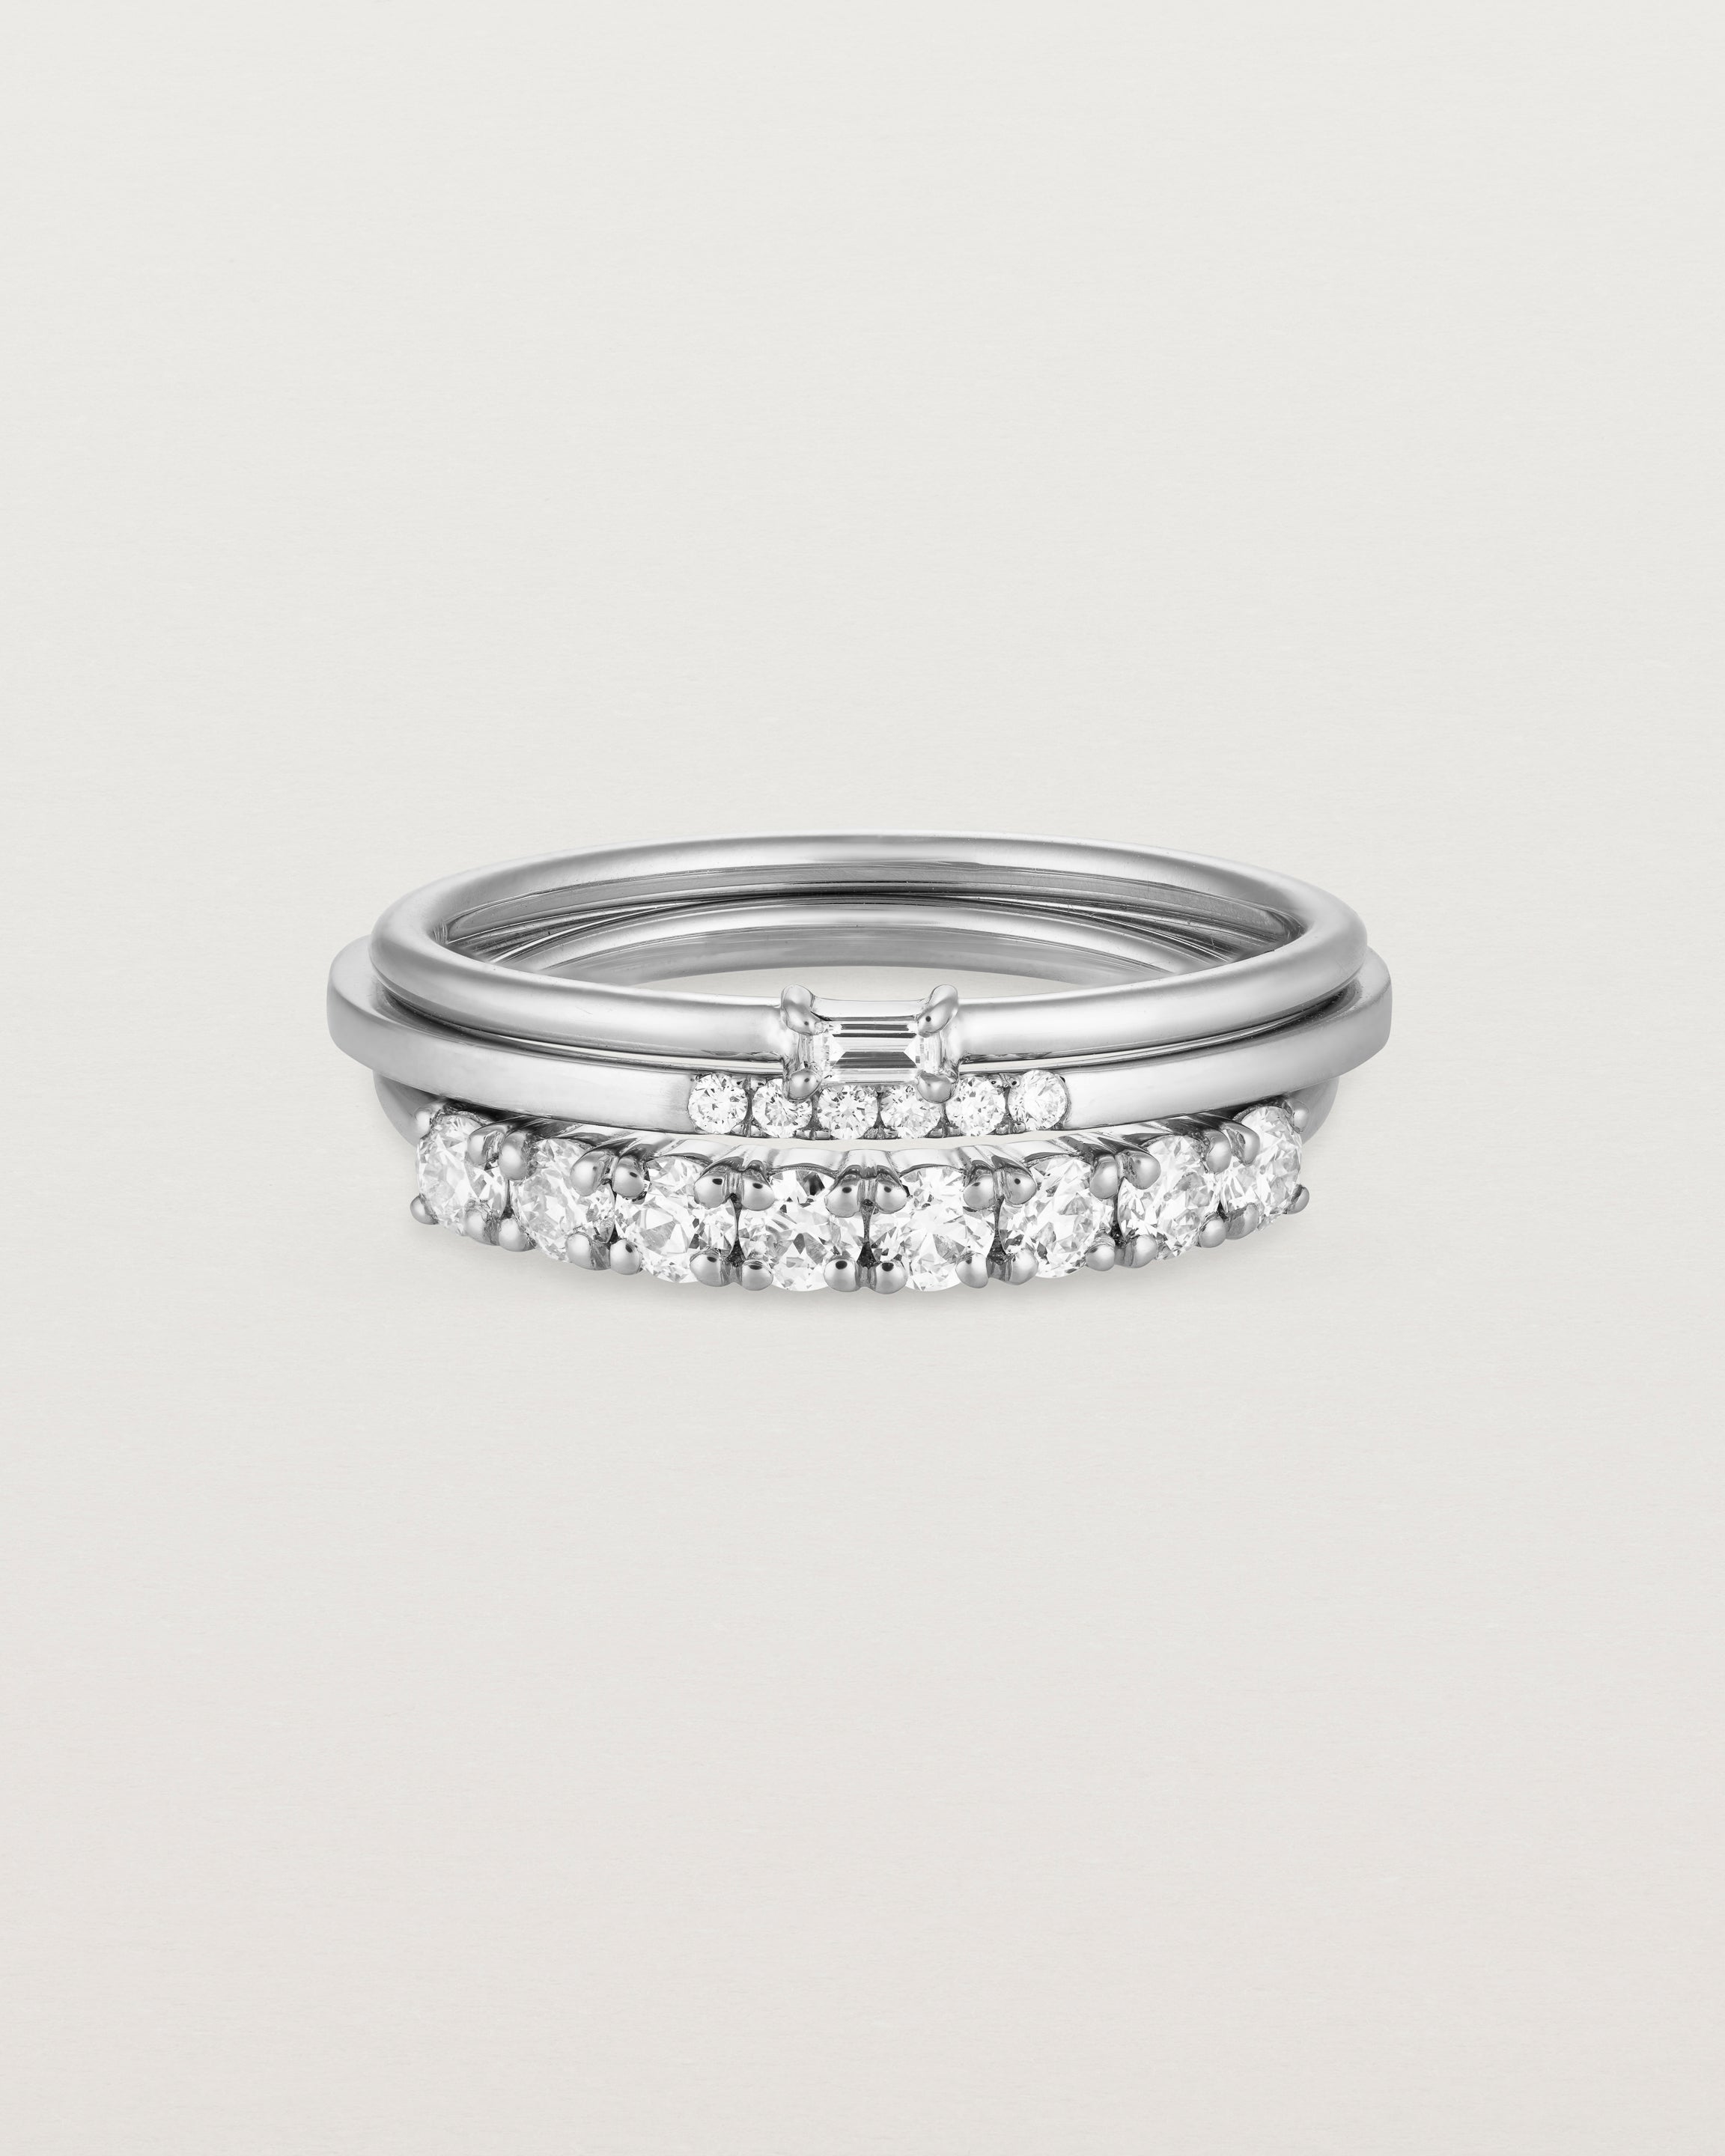 A set of three white gold bands, one featuring white round diamonds, one size white diamonds and one featuring a white emerald cut diamond